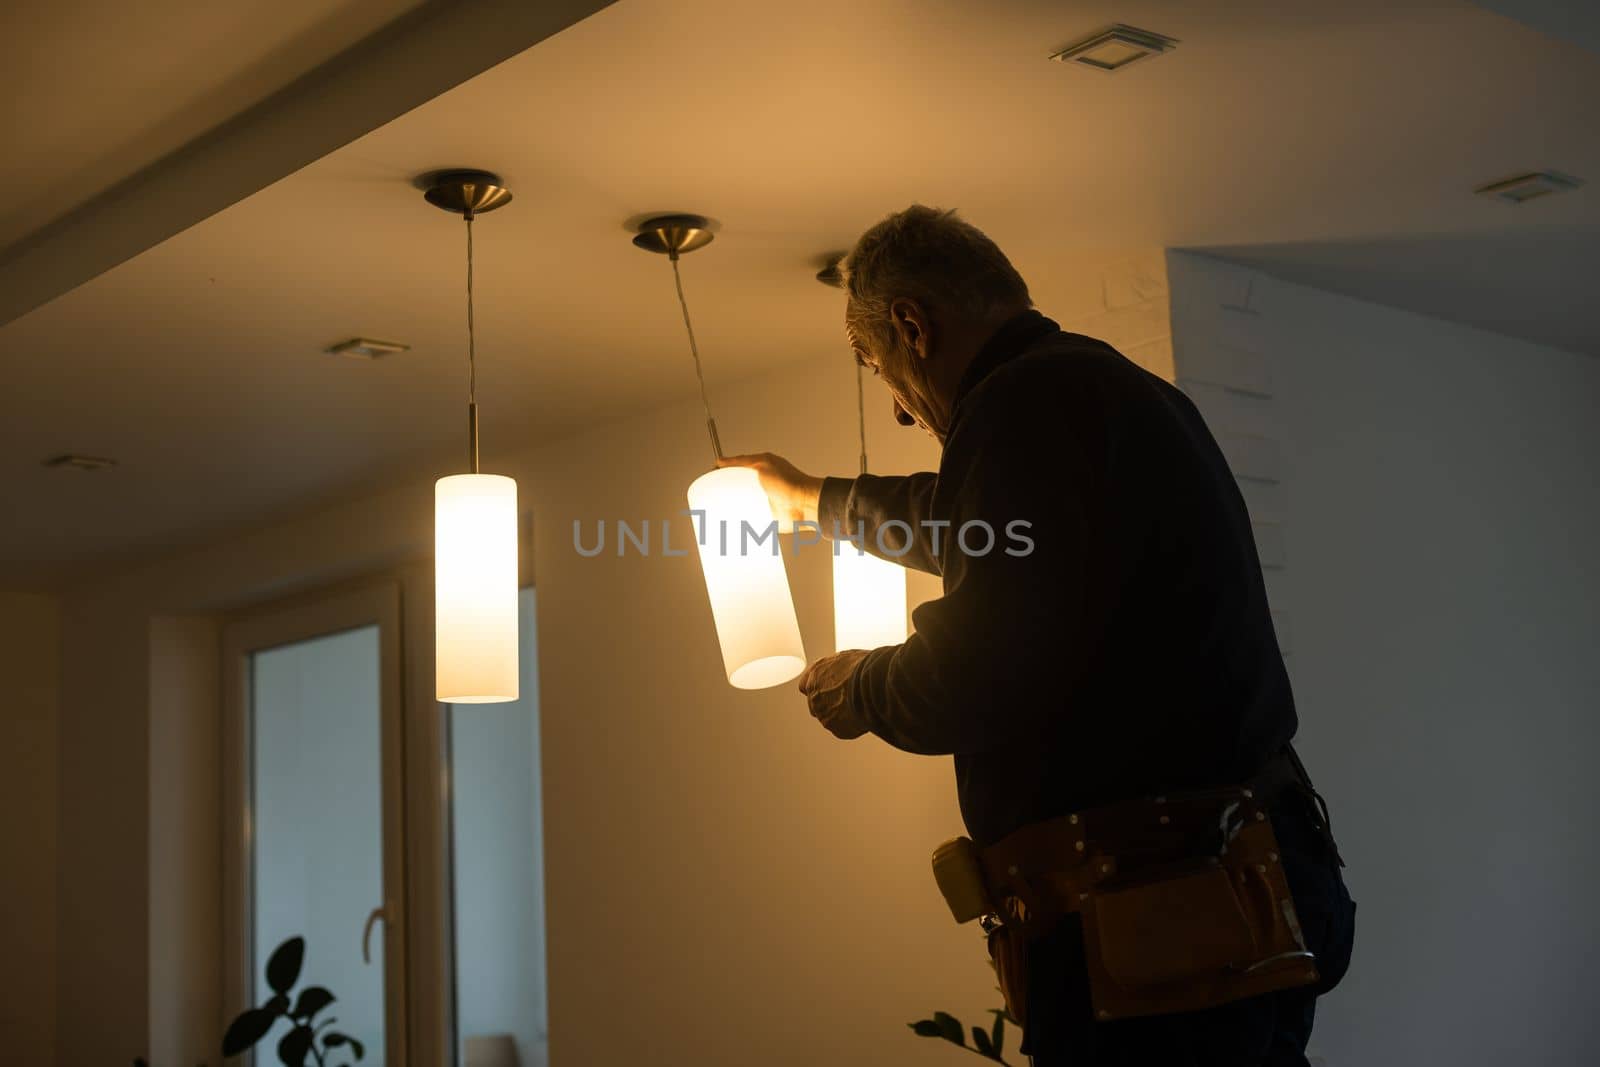 A male electrician changes the light bulbs in the ceiling light. men's household duties. care of electrical appliances at home by Andelov13